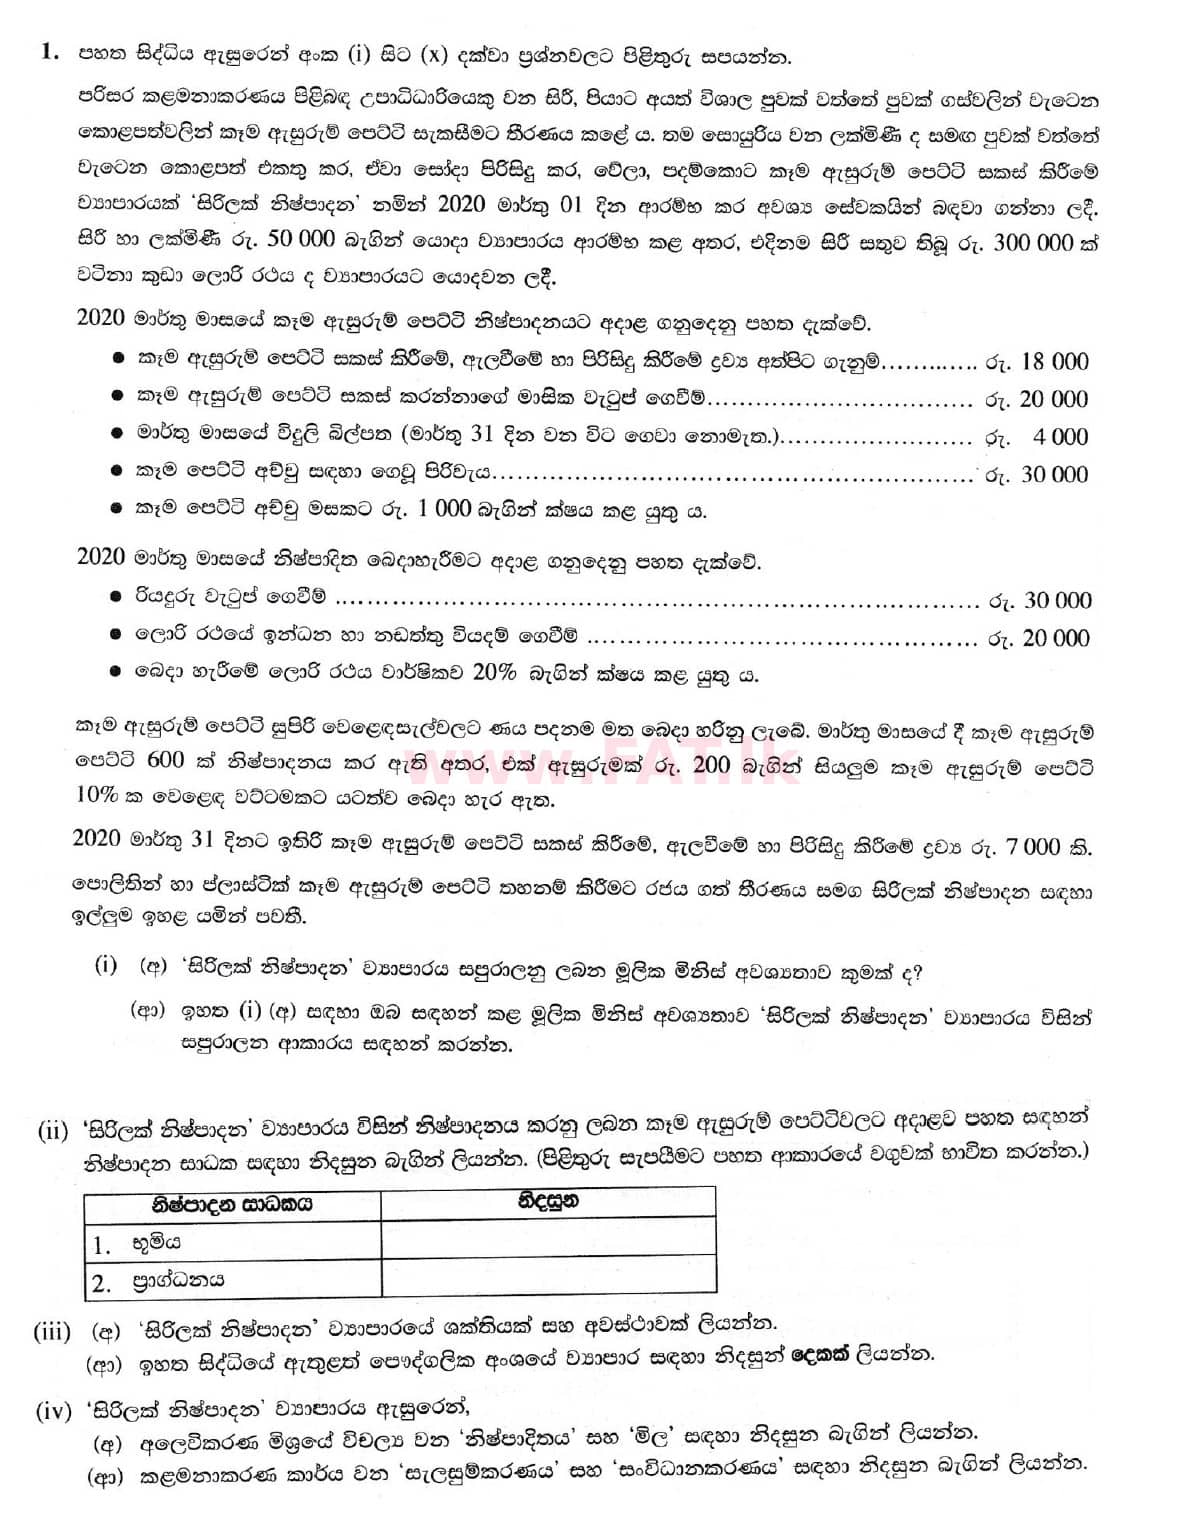 National Syllabus : Ordinary Level (O/L) Business and Accounting Studies - 2020 March - Paper II (සිංහල Medium) 1 1